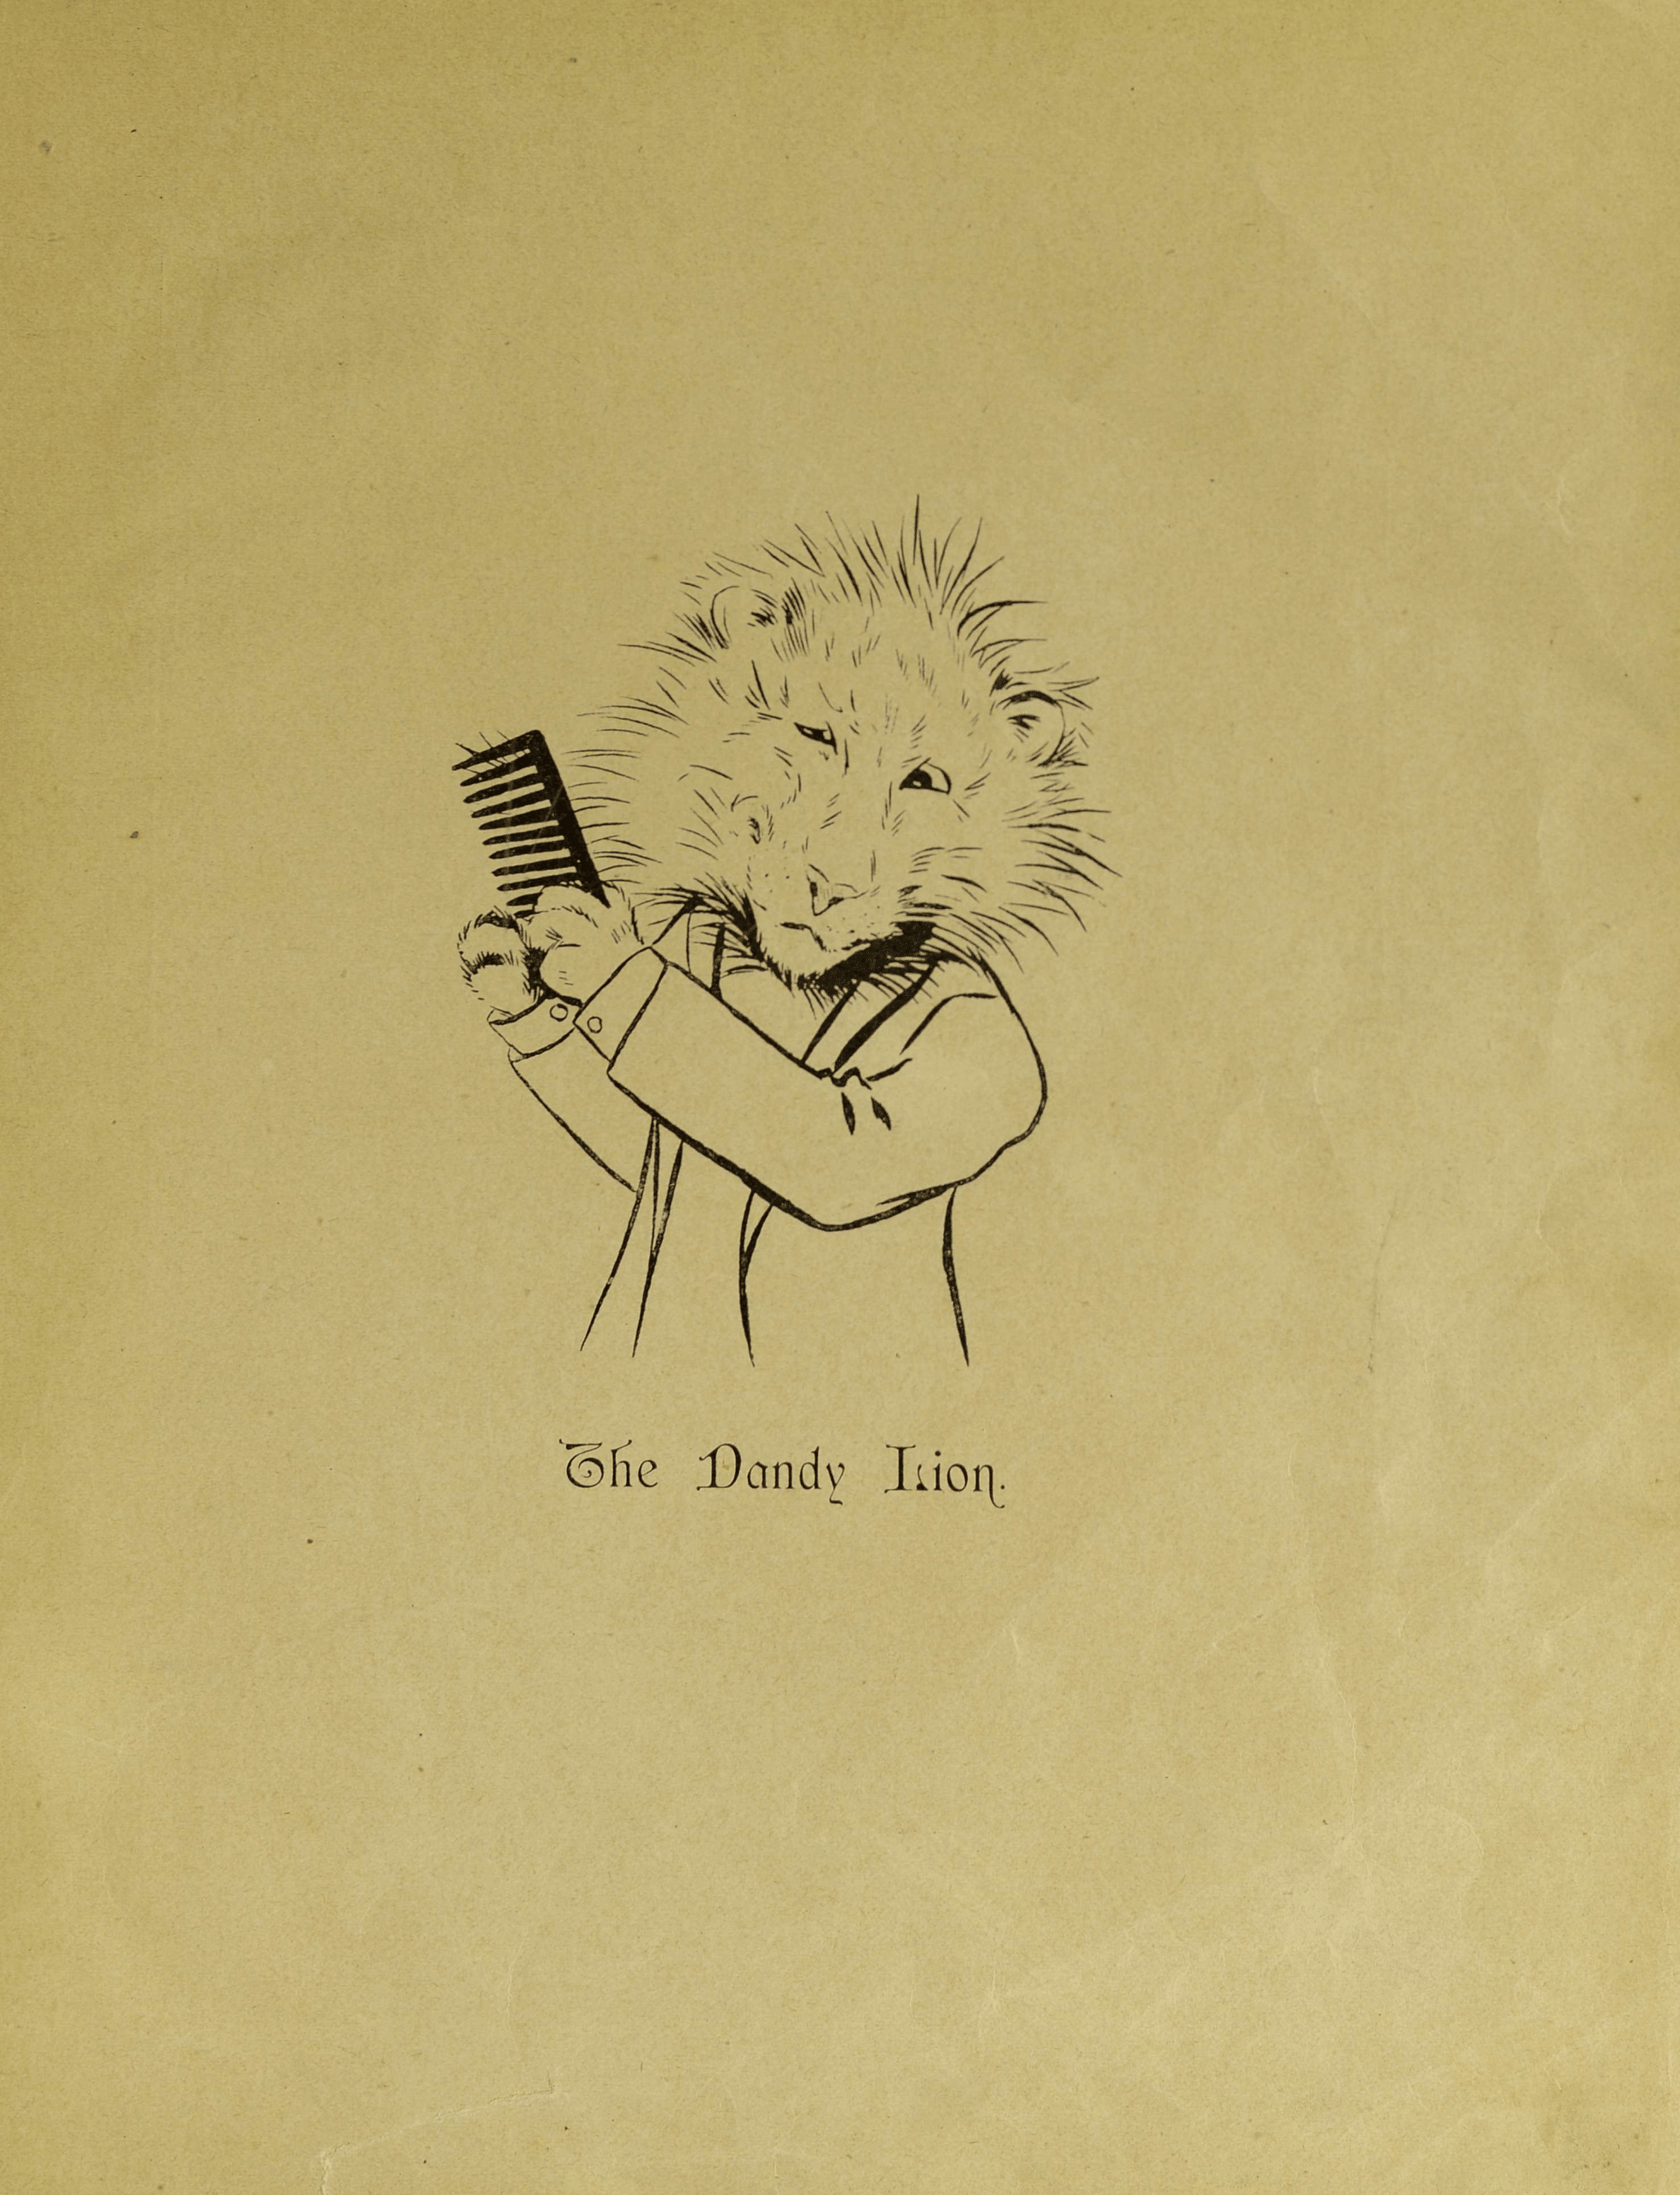 Louis Wain illustration with: 1901, 1subject, black_and_white, book, book:the_dandy_lion, caption, clothes, color:white, grooming, humanised, lion, portrait